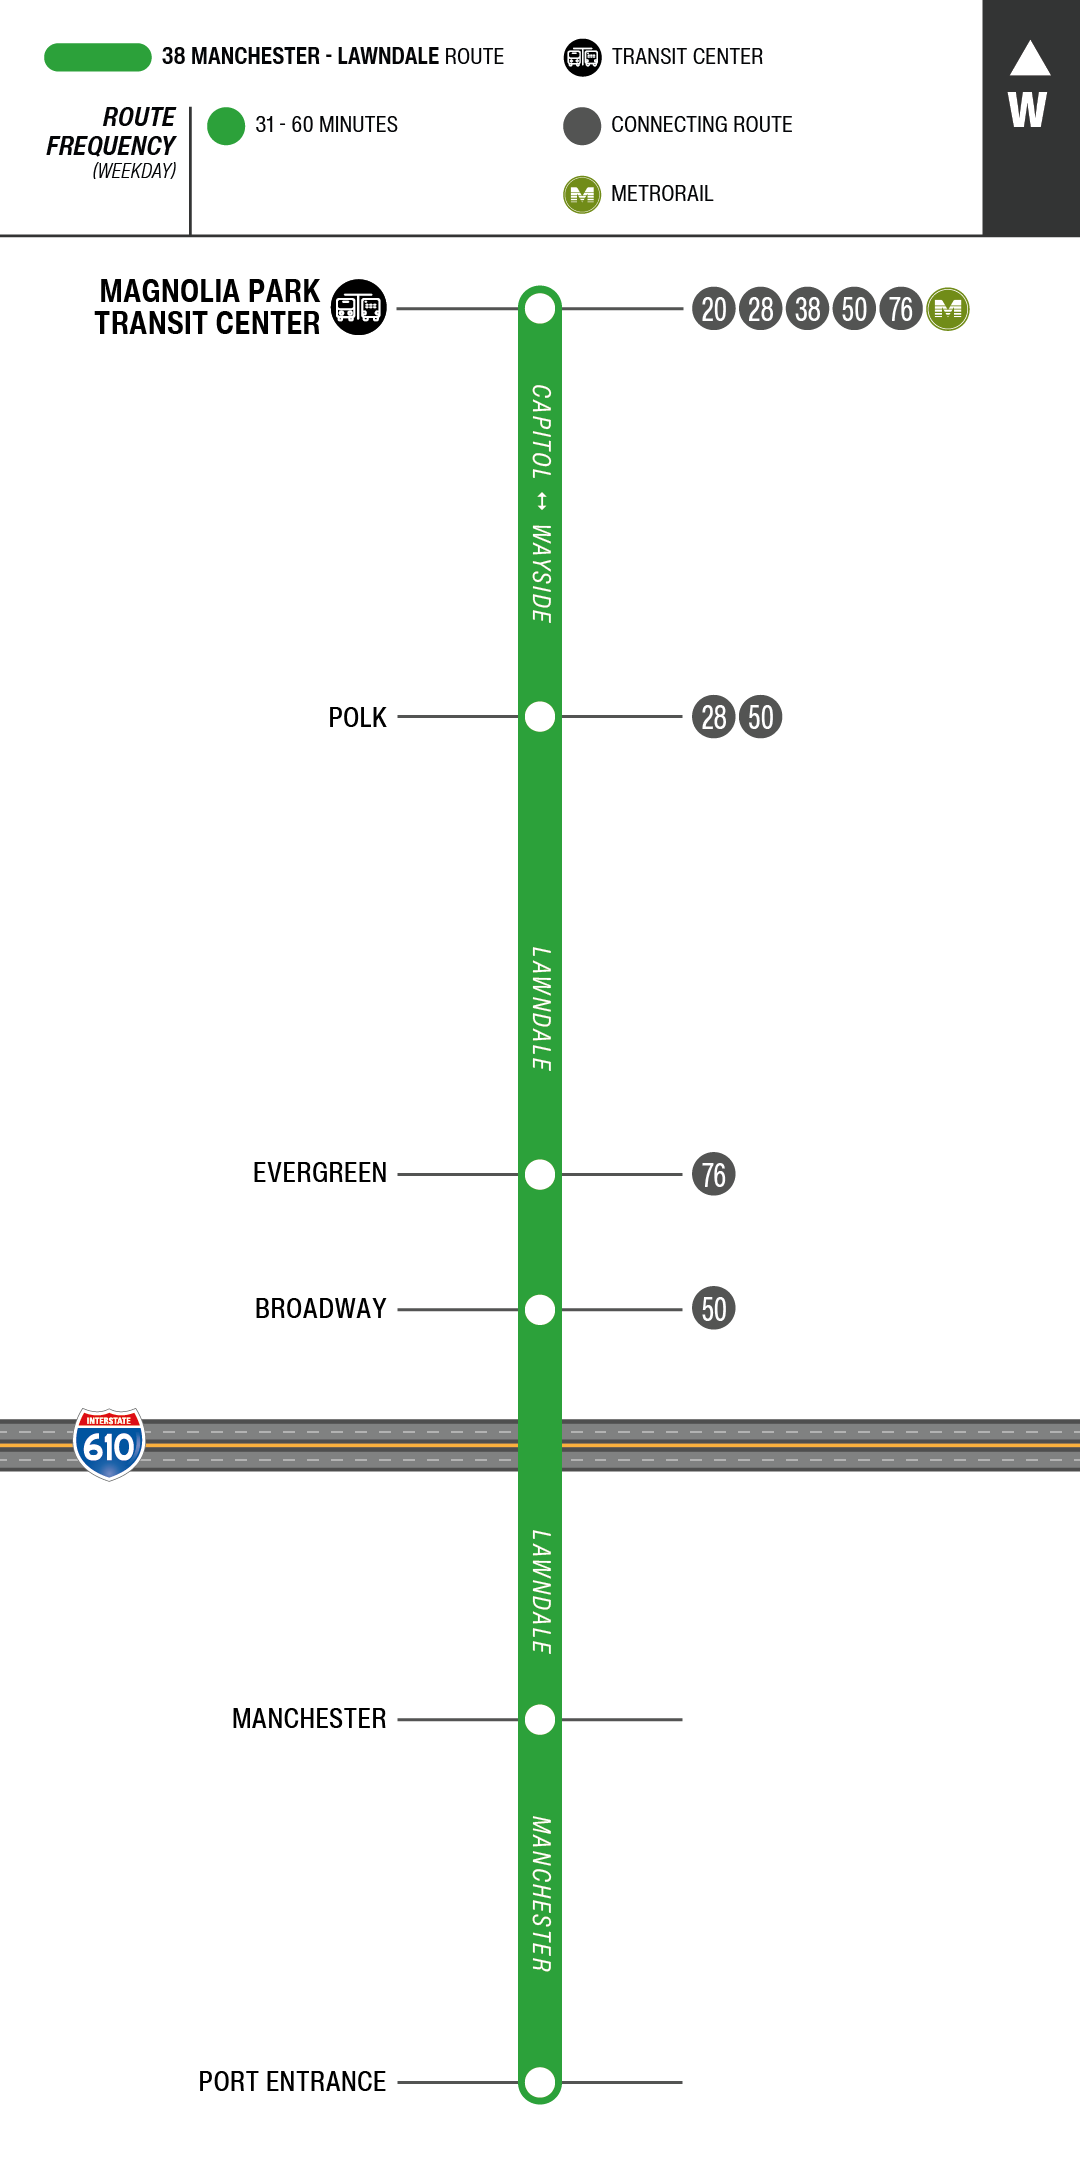 Route map for 38 Manchester-Lawndale bus